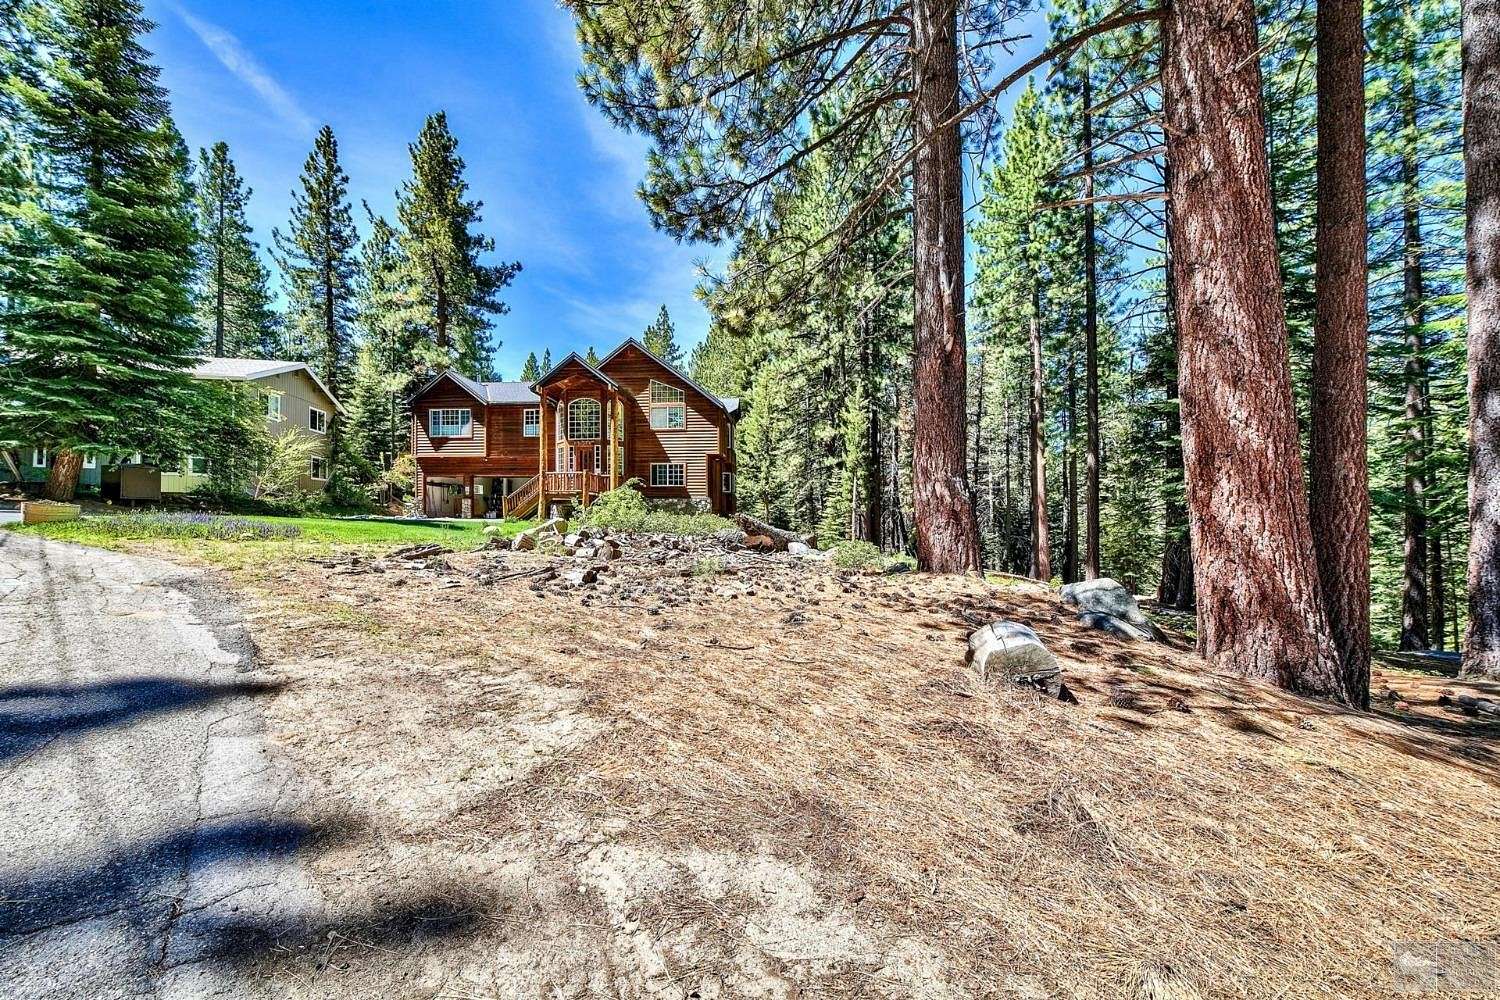 0.45 Acres of Land for Sale in South Lake Tahoe, California